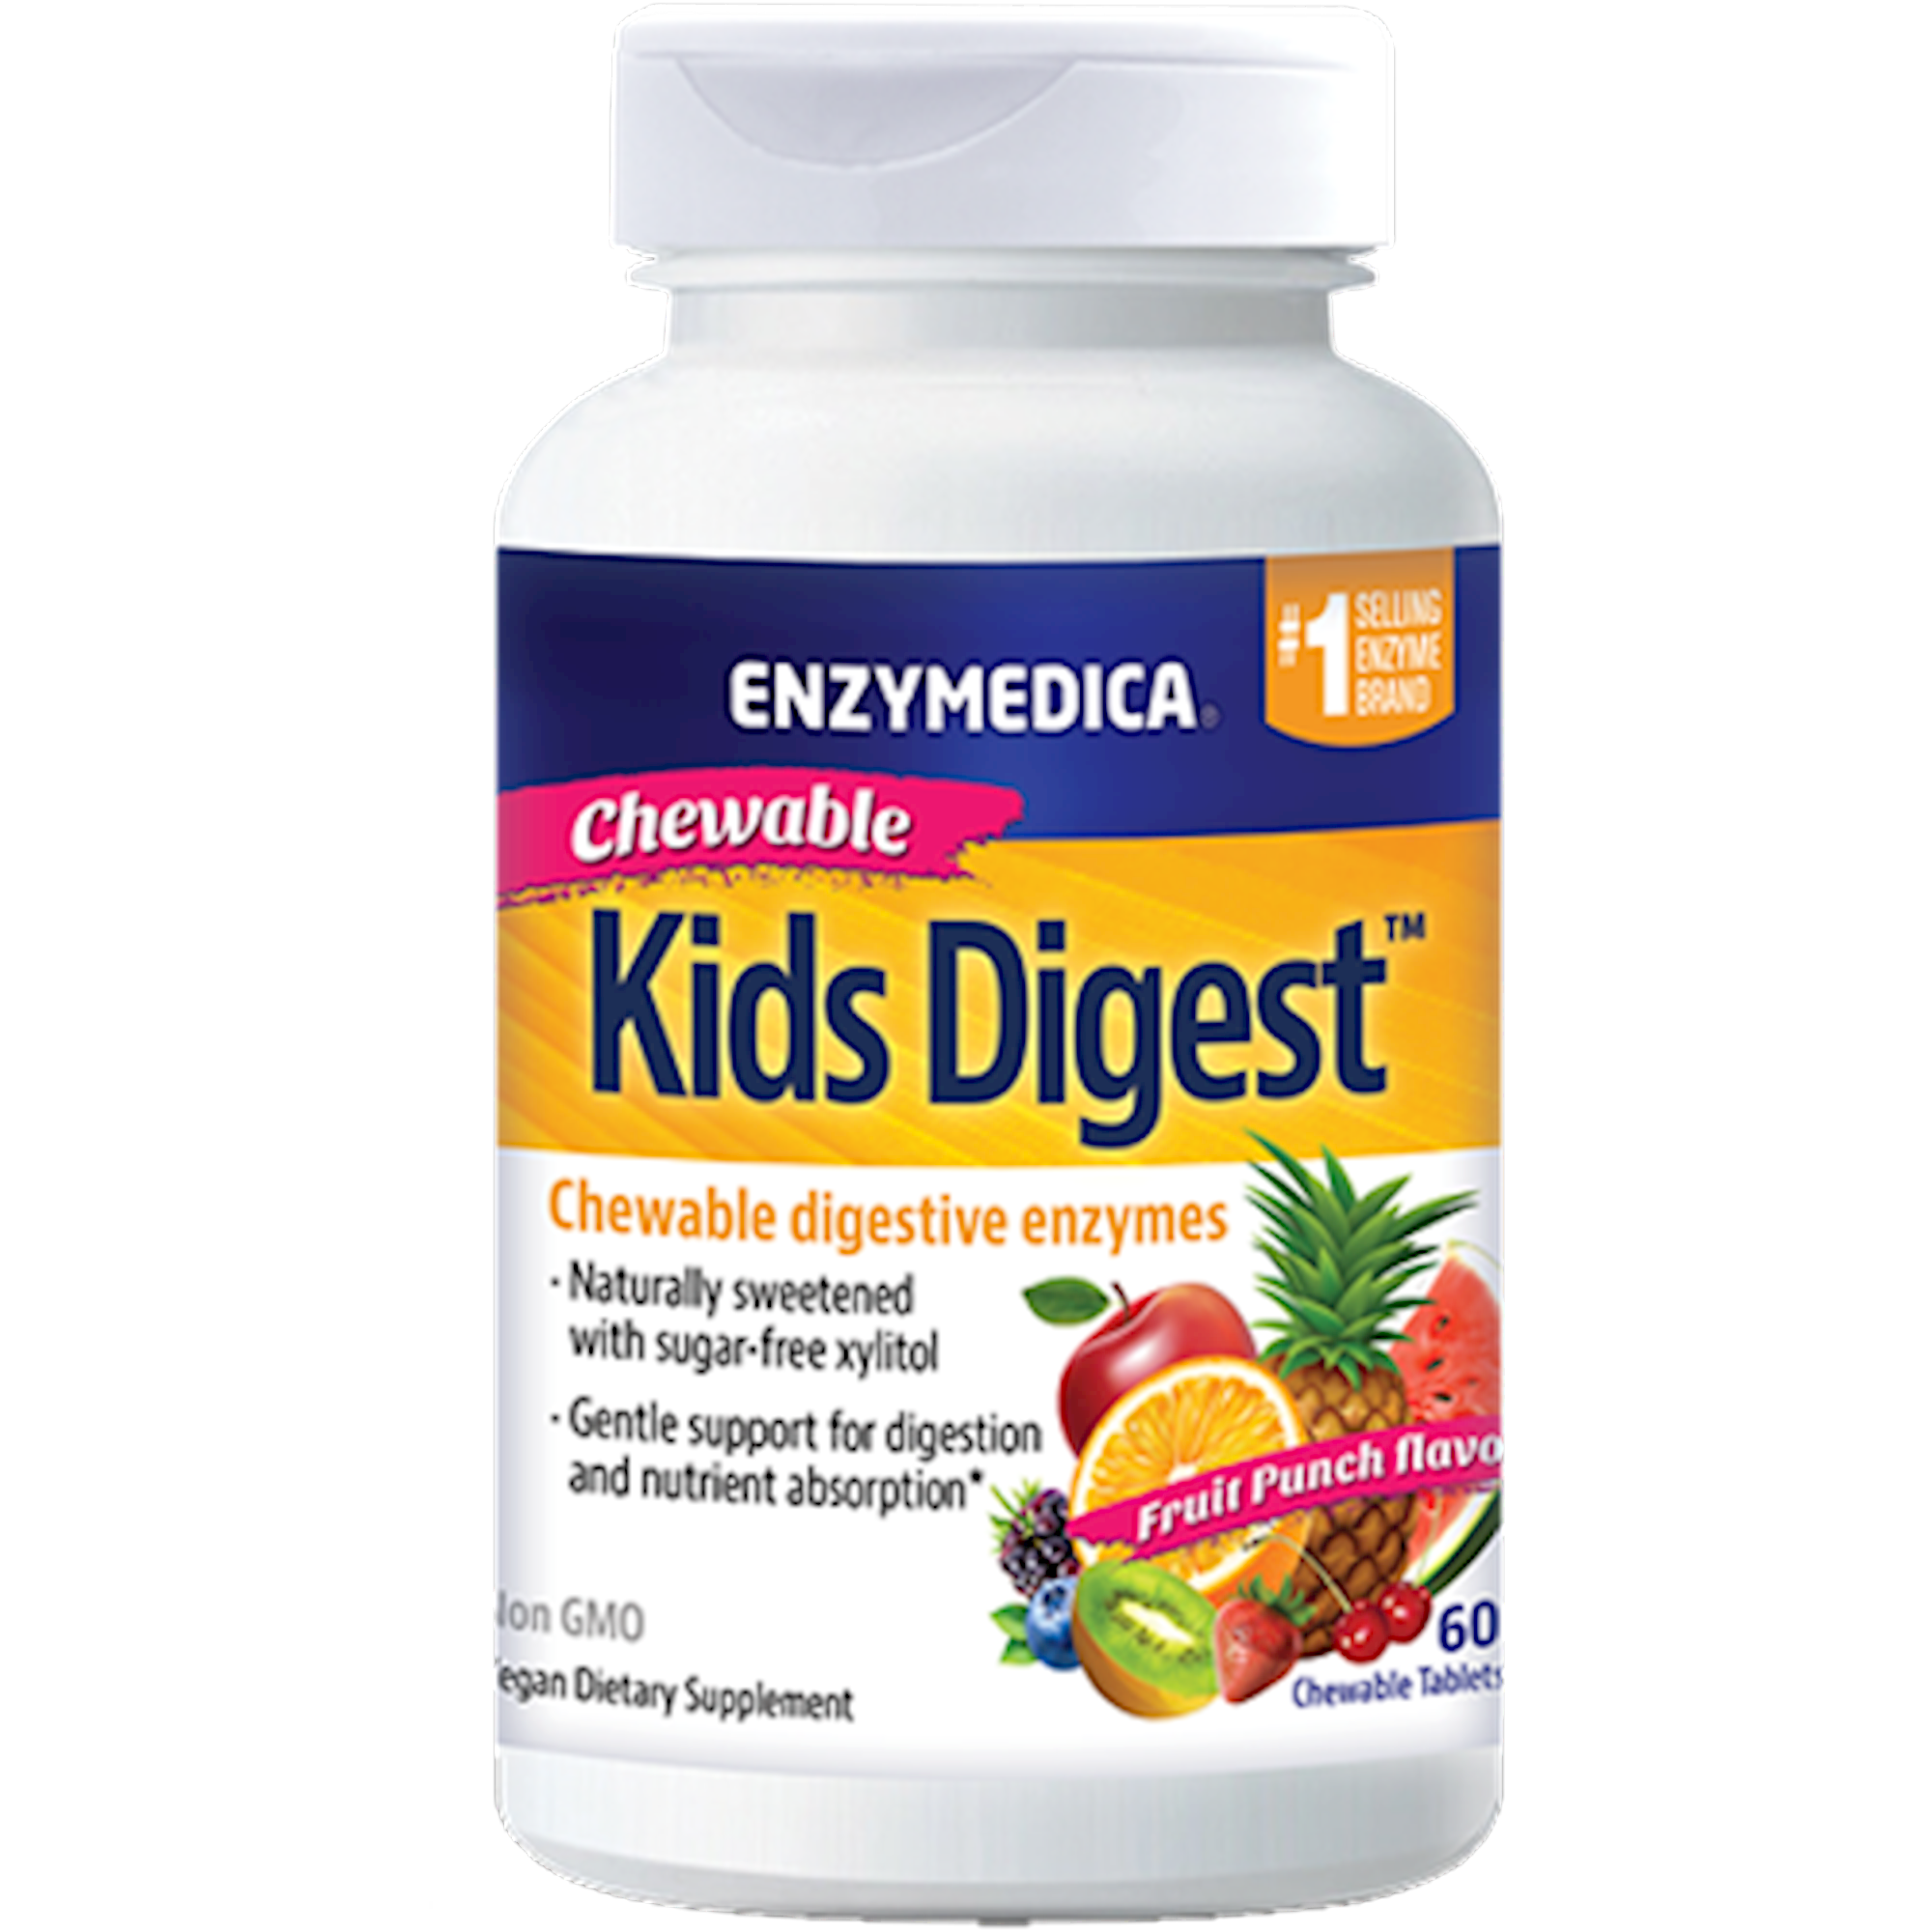 Kid's Digest 60 chewable tablets